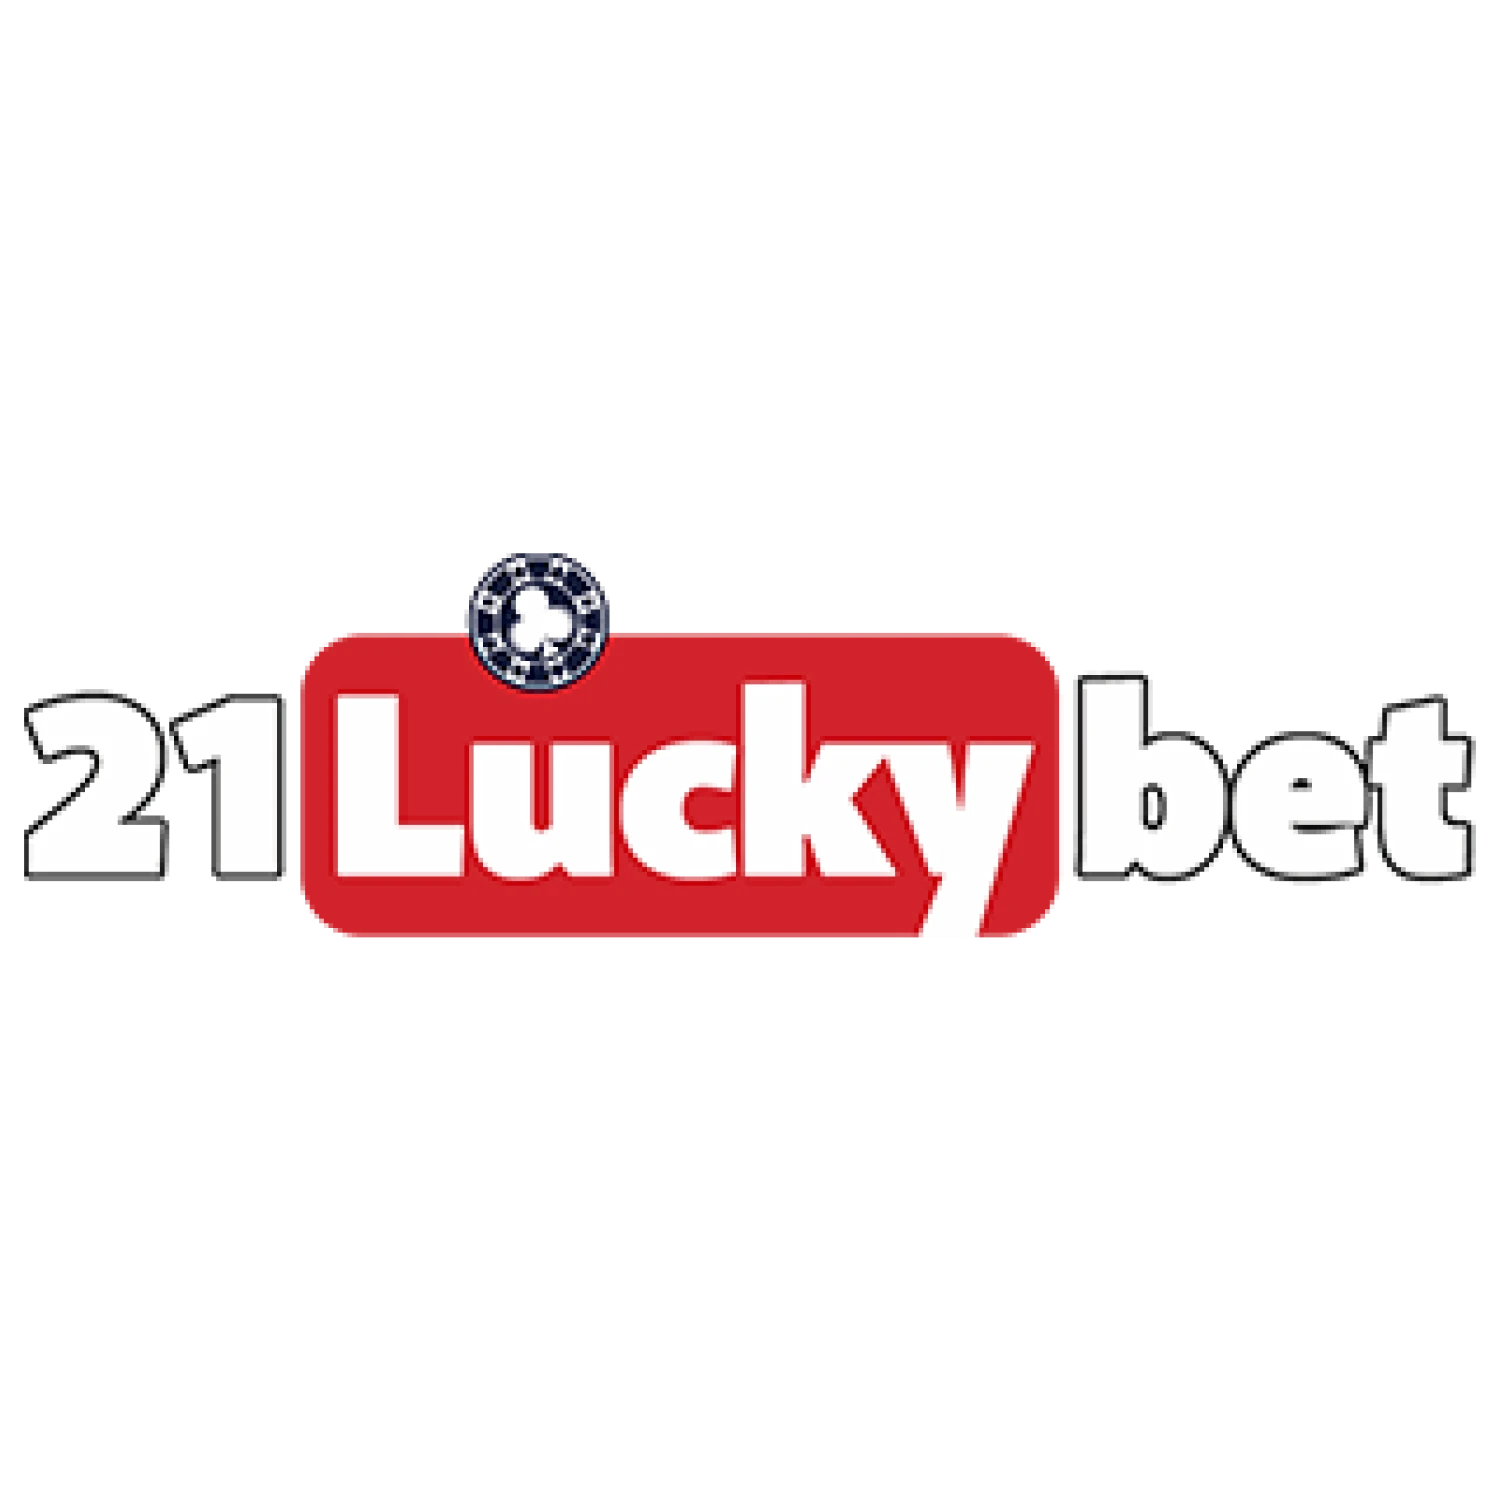 With 21luckybet, place your bets and play casino games.